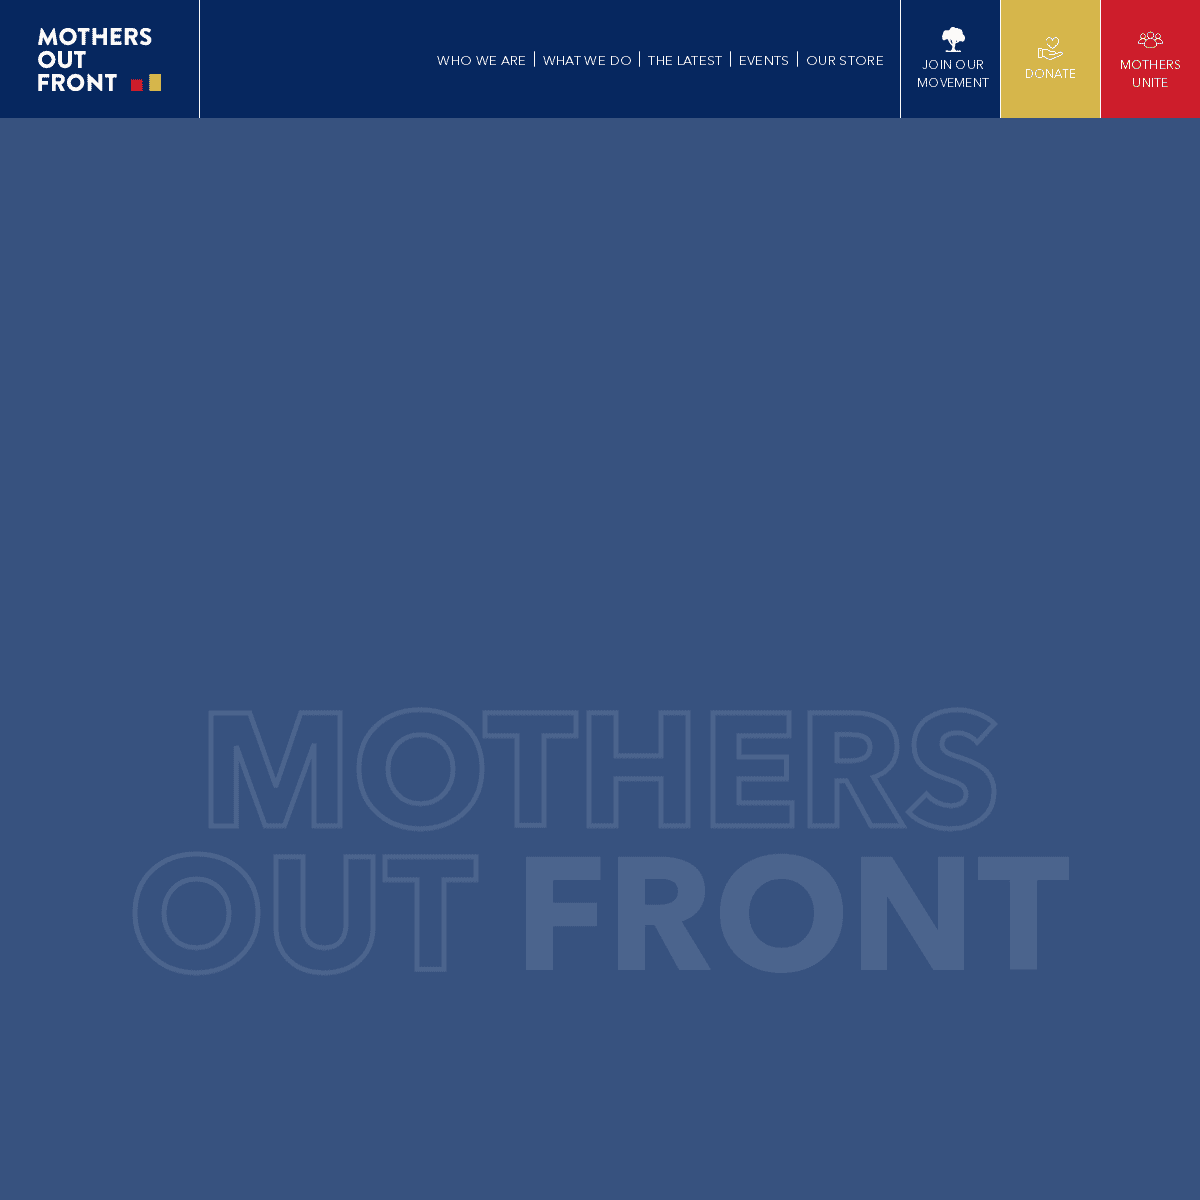 A complete backup of https://mothersoutfront.org